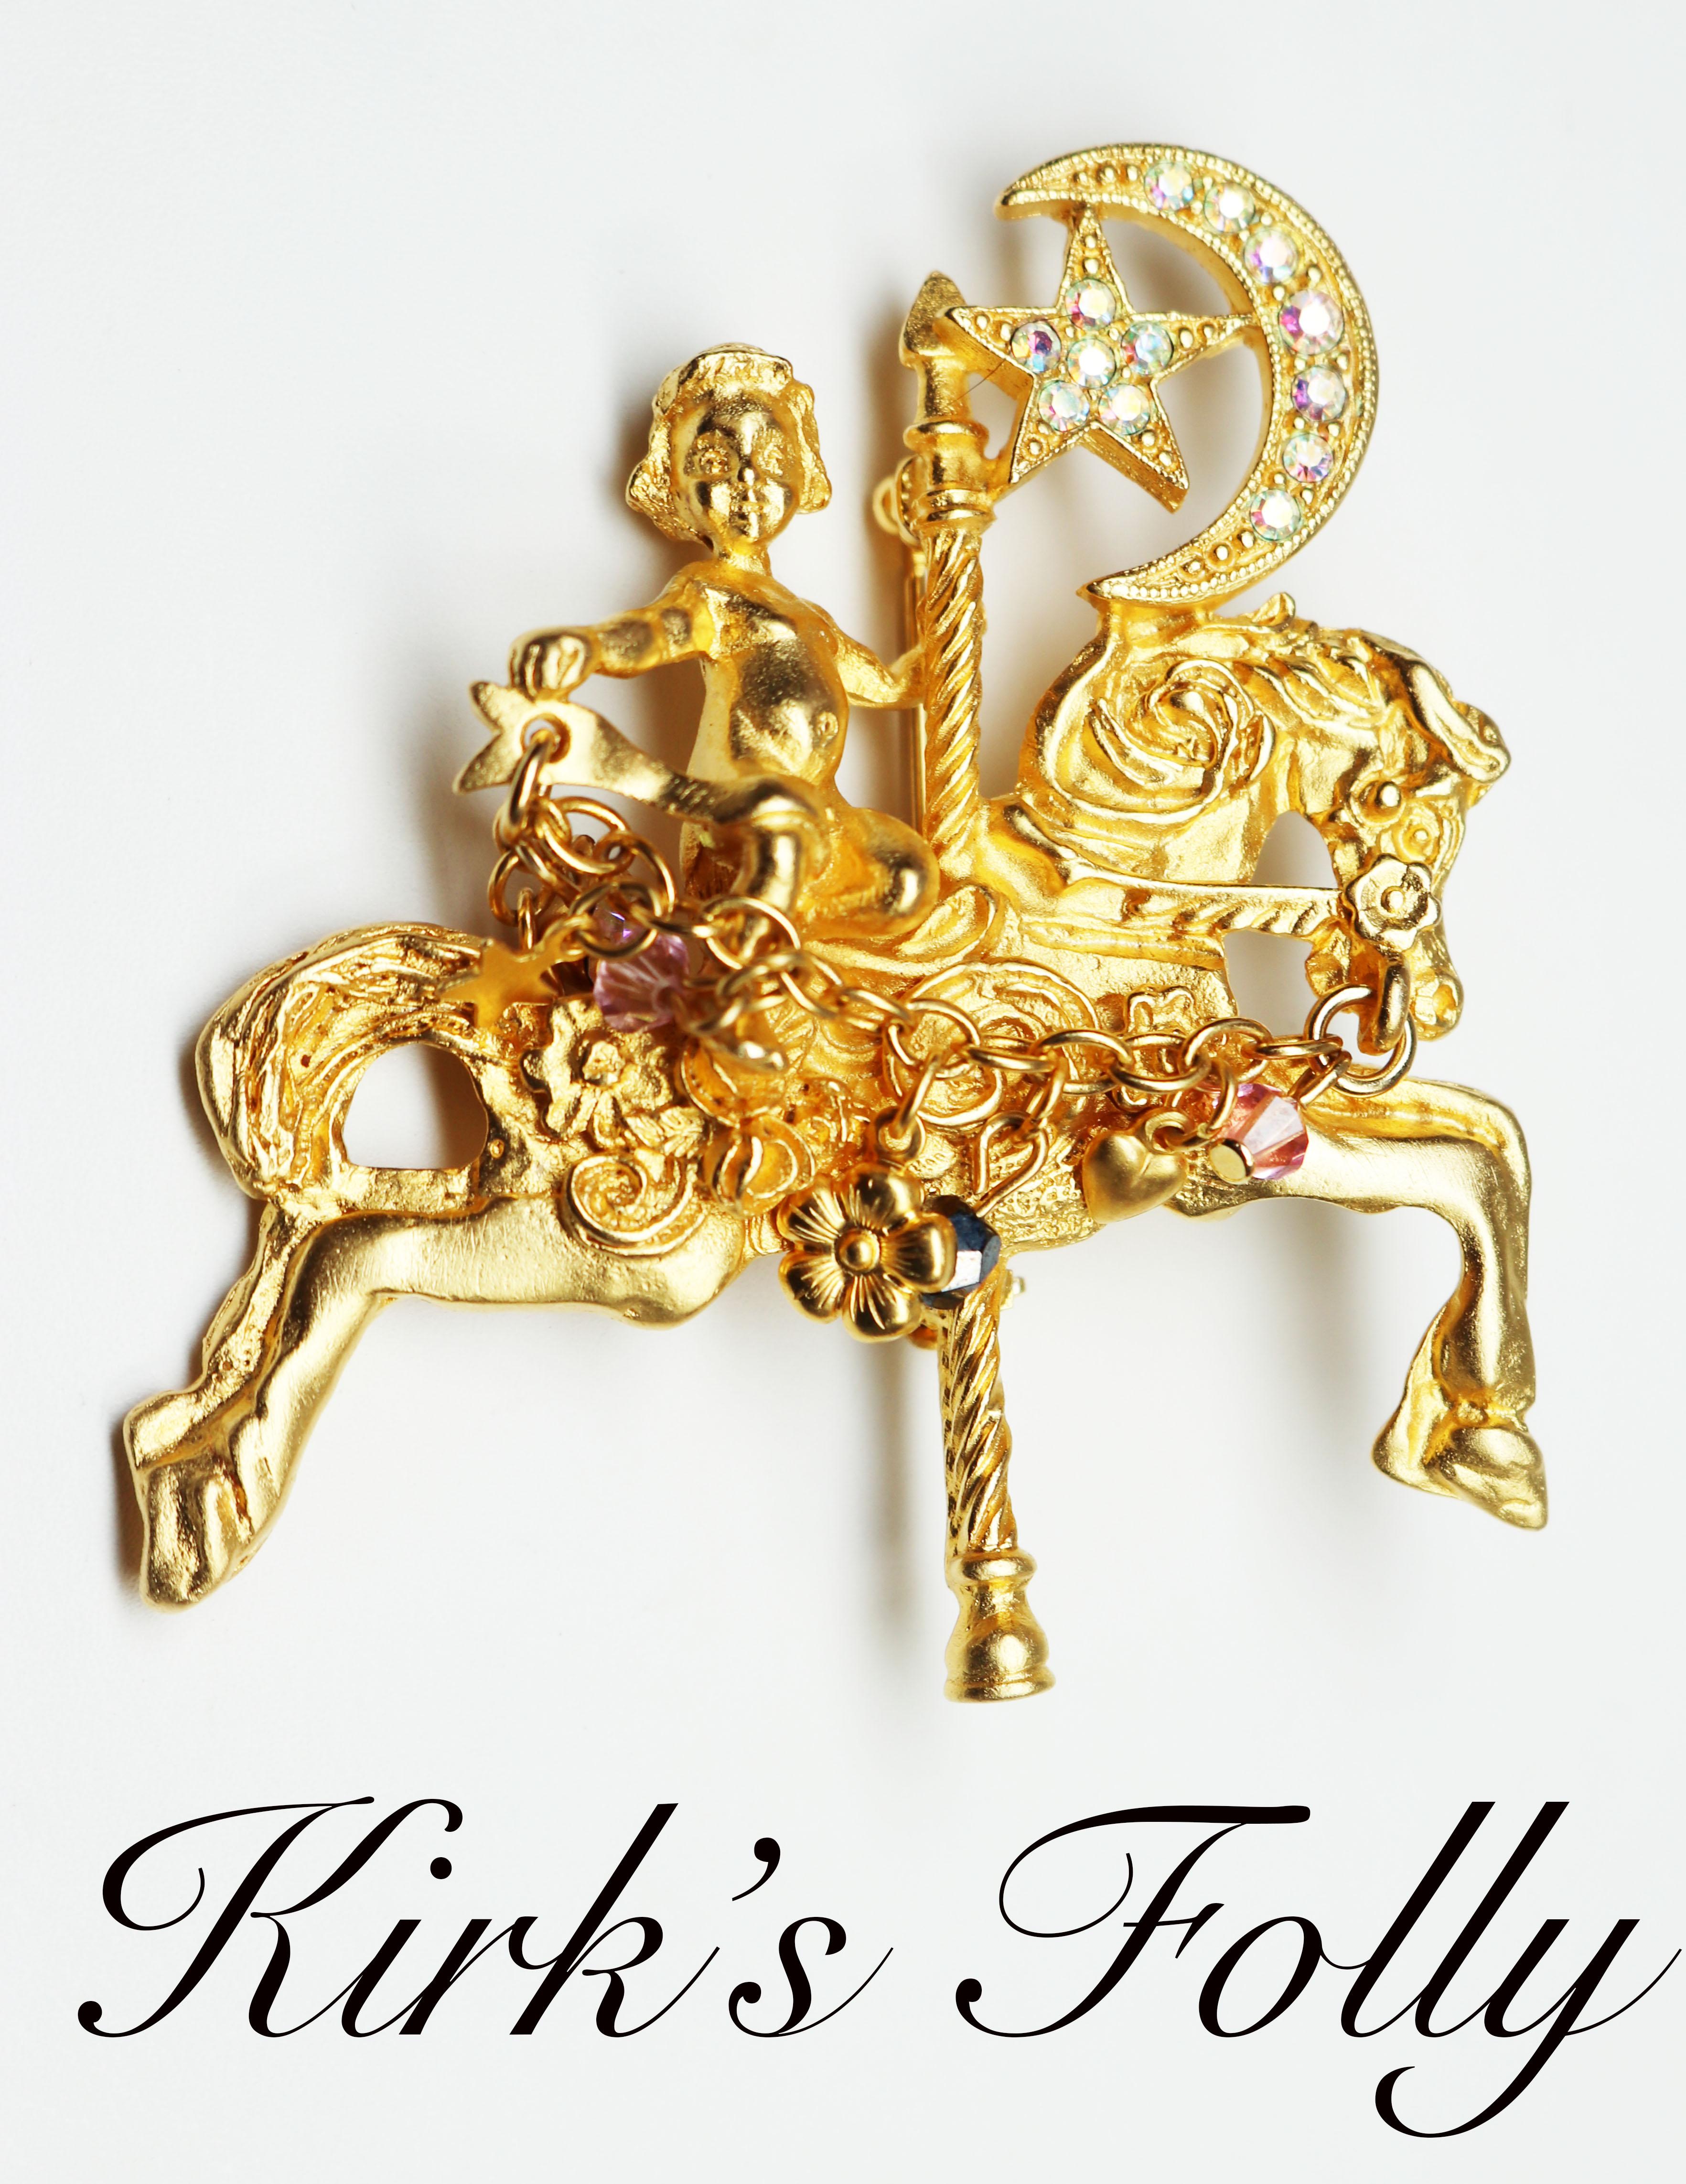 This brooch is one of Kirk Folly's most famous pieces with a decadent, magical look. It features bright aurora borealis stones encrusted in the magical celestial charms adorning an angel riding a golden carousel horse. There is a decorative chain